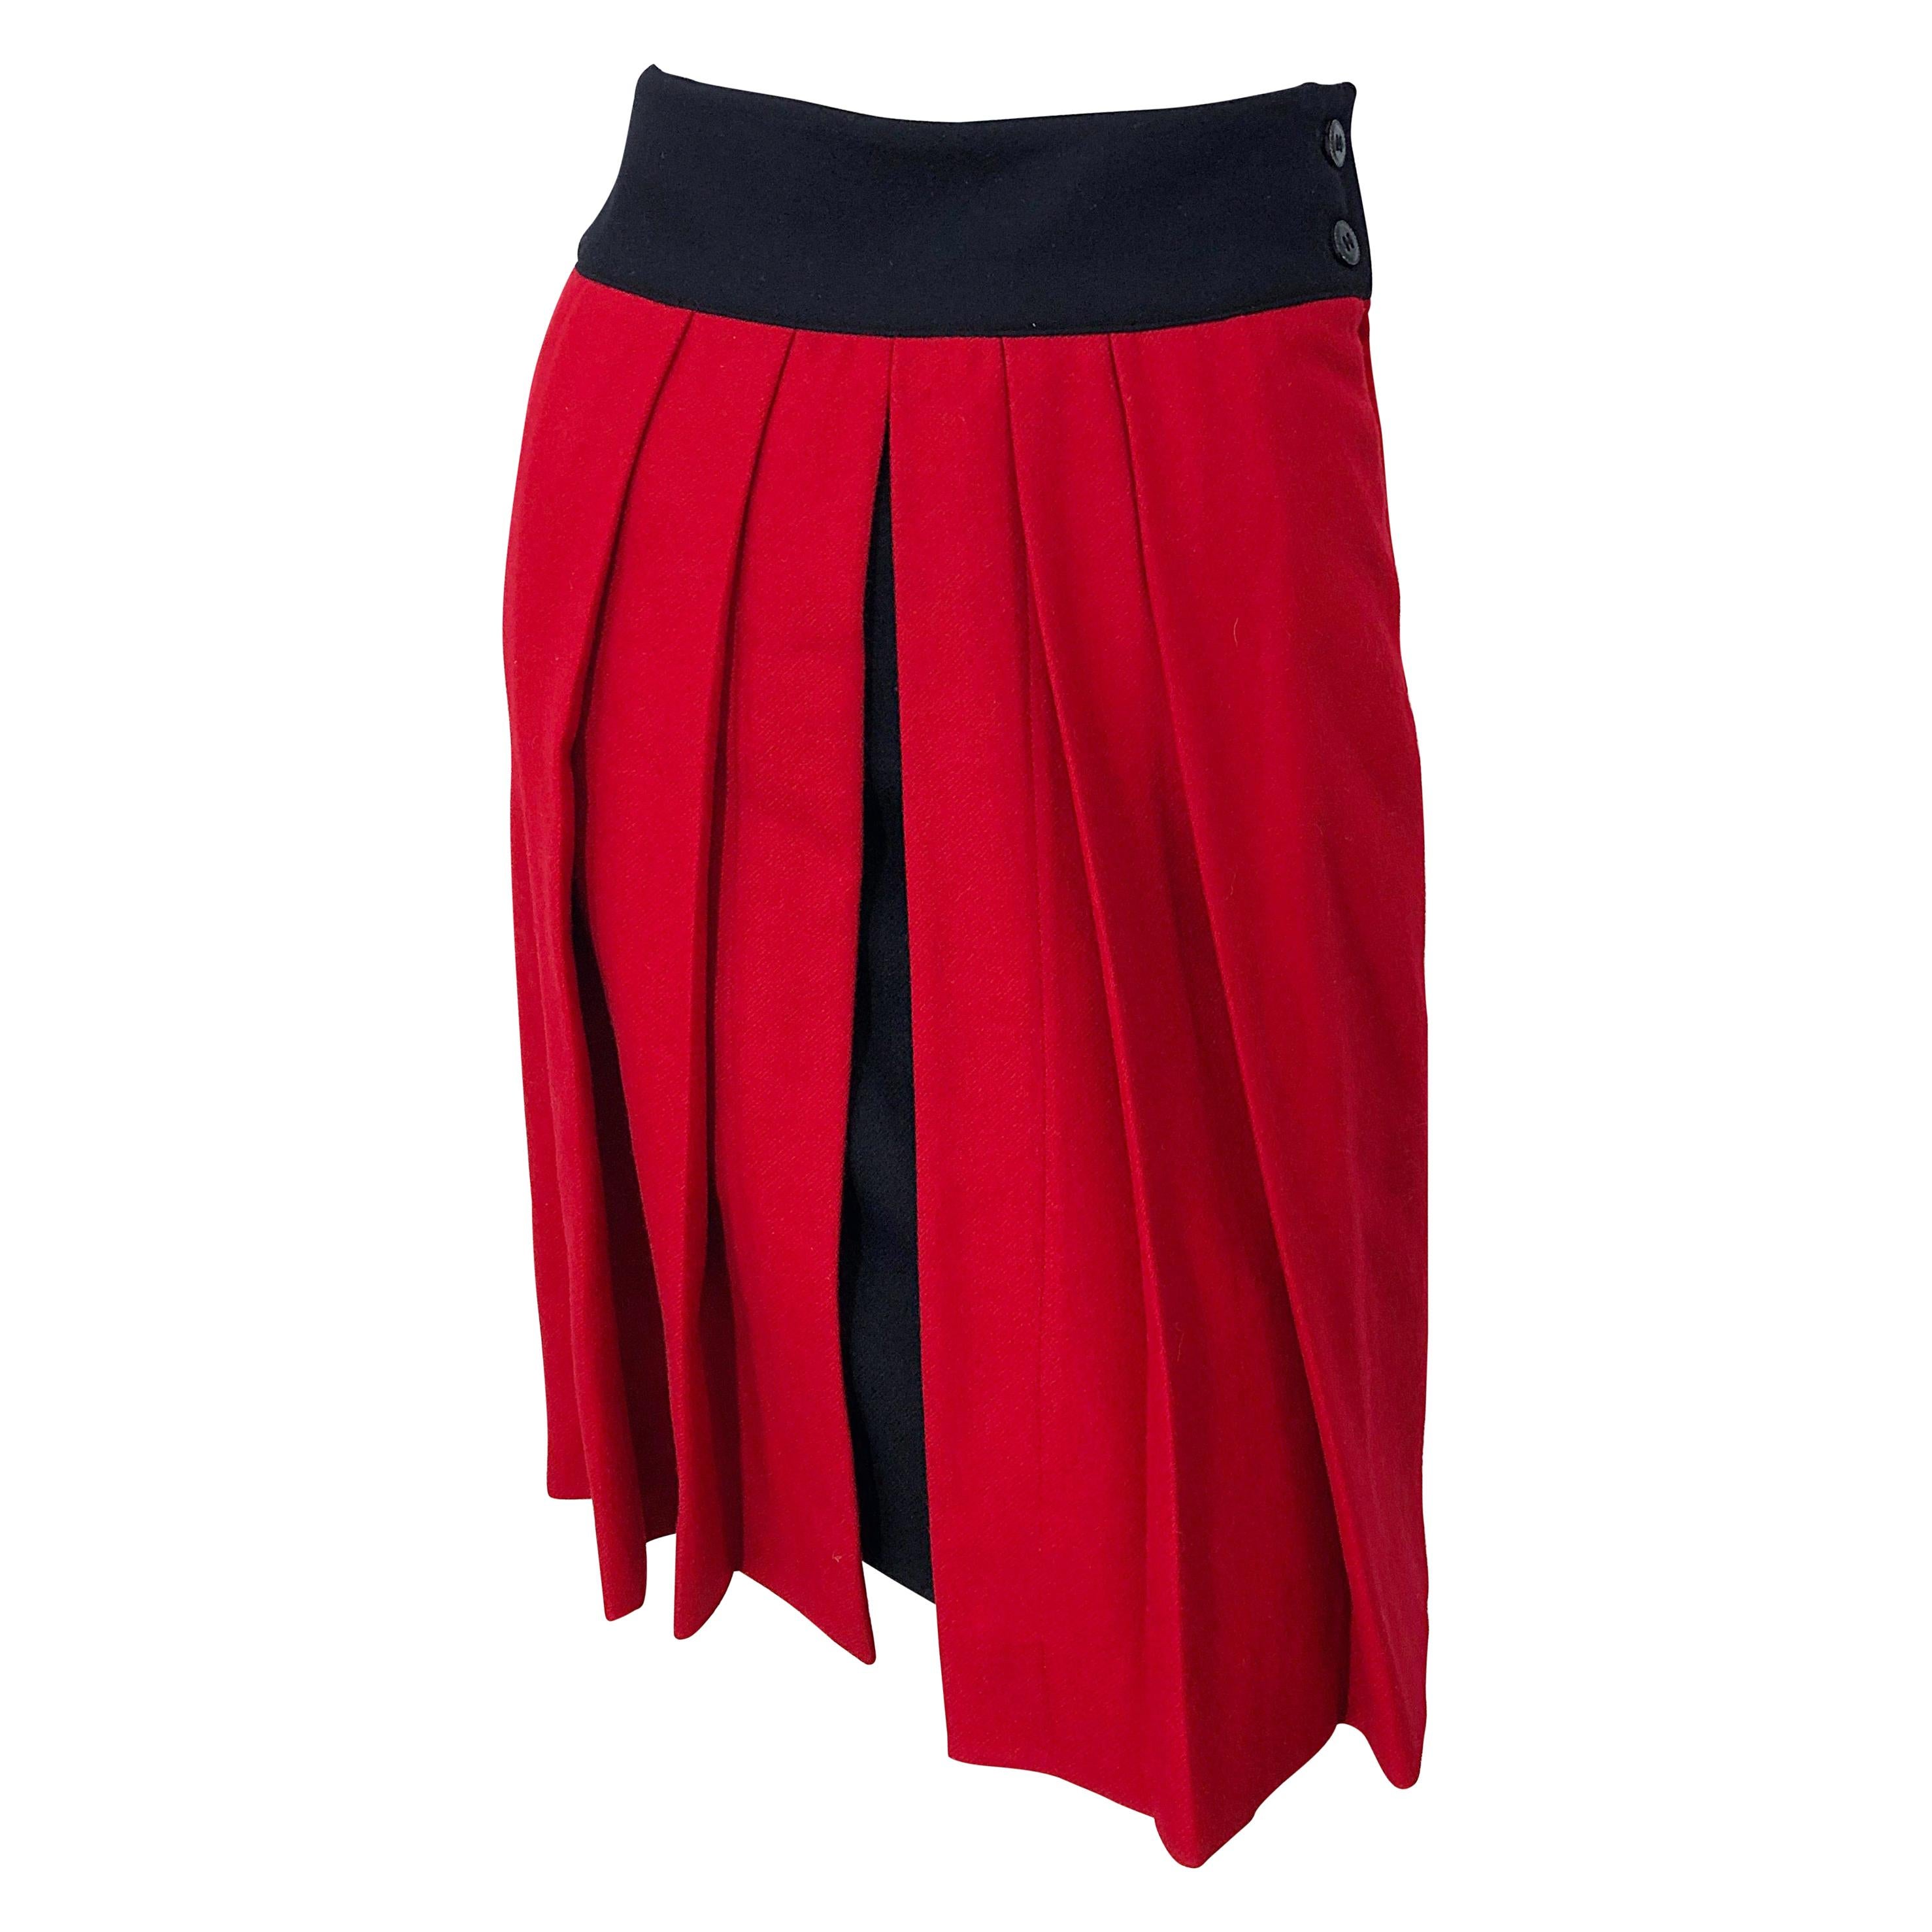 Gianni Versace for Genny Lipstick Red + Black 1980s Vintage 80s Pencil Skirt  For Sale